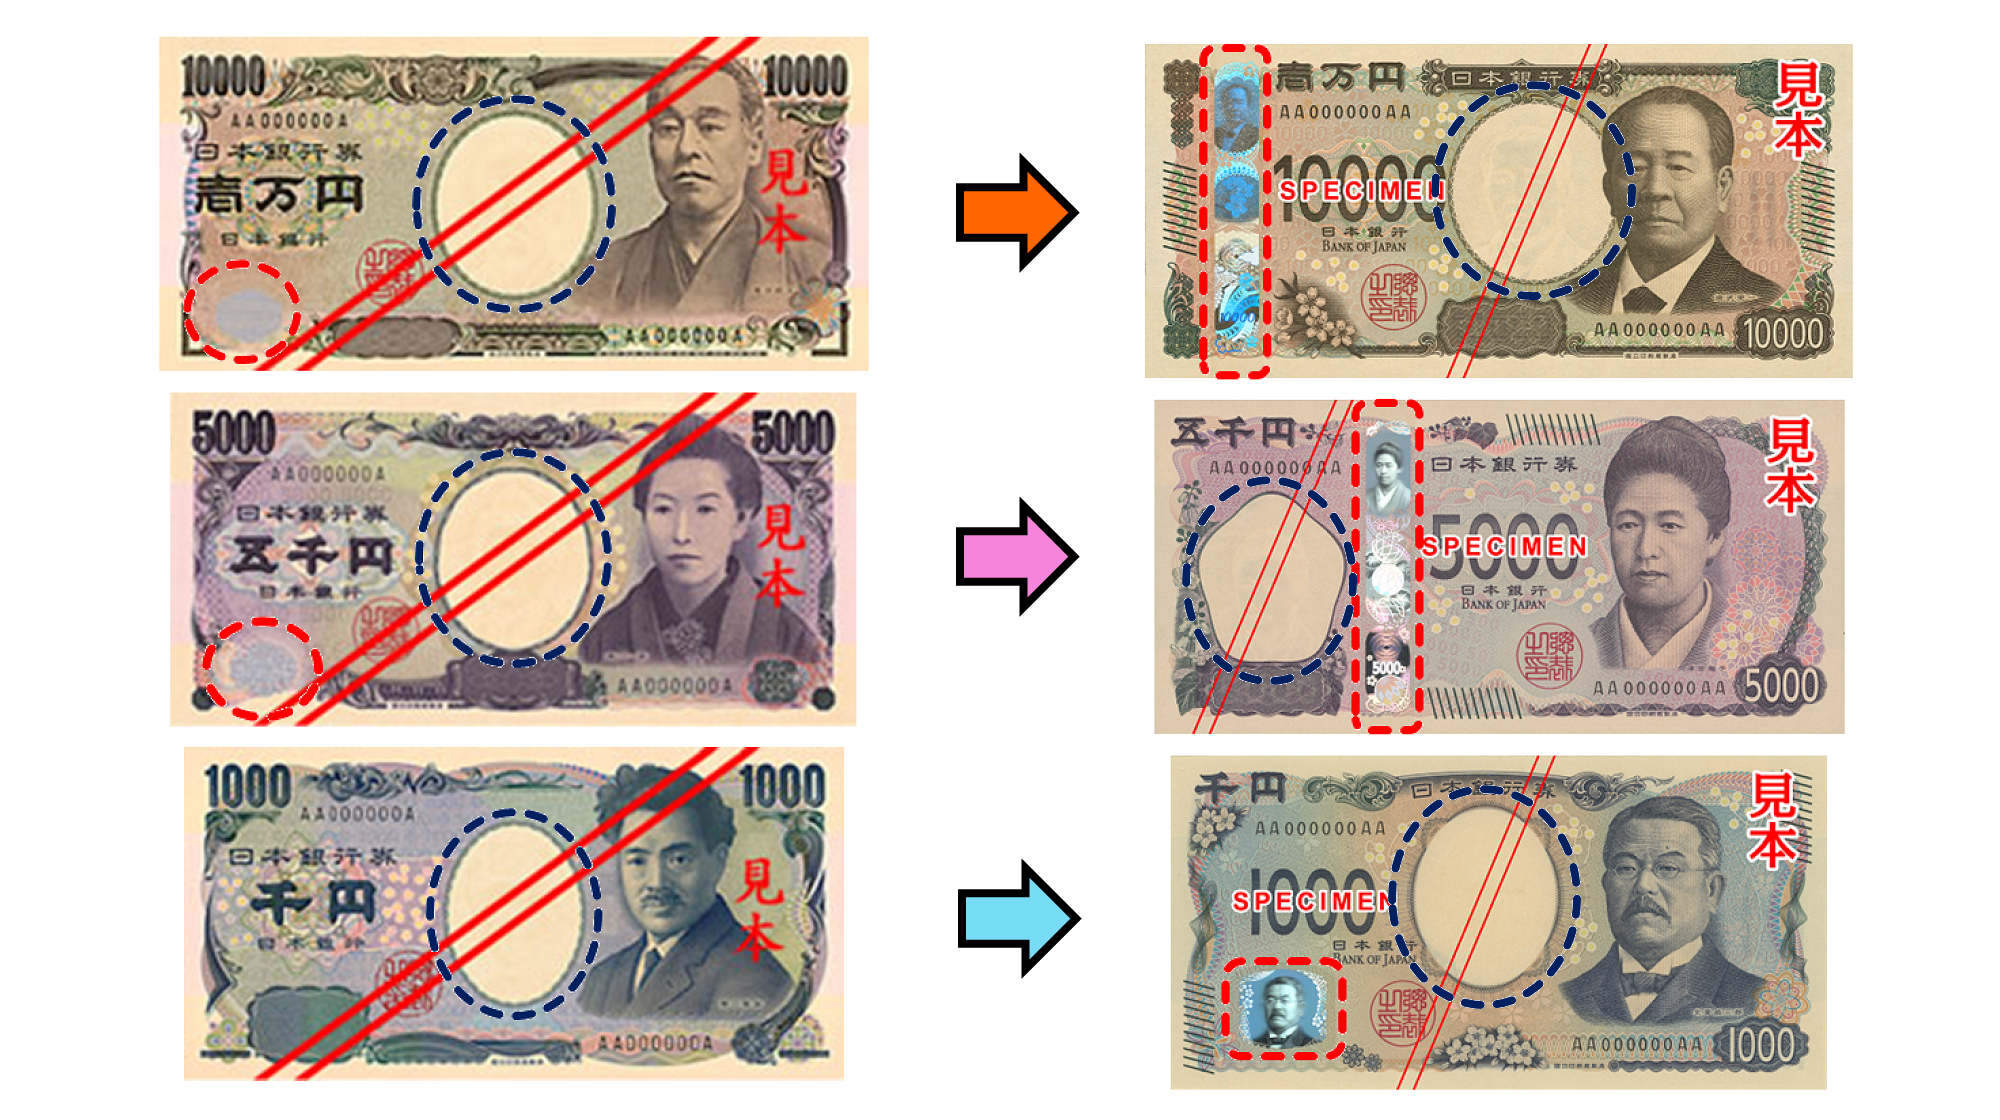 Images of the front of the current and new series of banknotes shown to compare the shape and position of the holograms and watermarks. On the 10,000 yen note, the holographic stripe is on the left, while on the 5,000 yen note, it is near the center. On the 1,000 yen note, the holographic patch is at the bottom left. The shape and position of the portrait watermark on the 5,000 yen note differs markedly from those on the 10,000 yen and 1,000 yen notes.